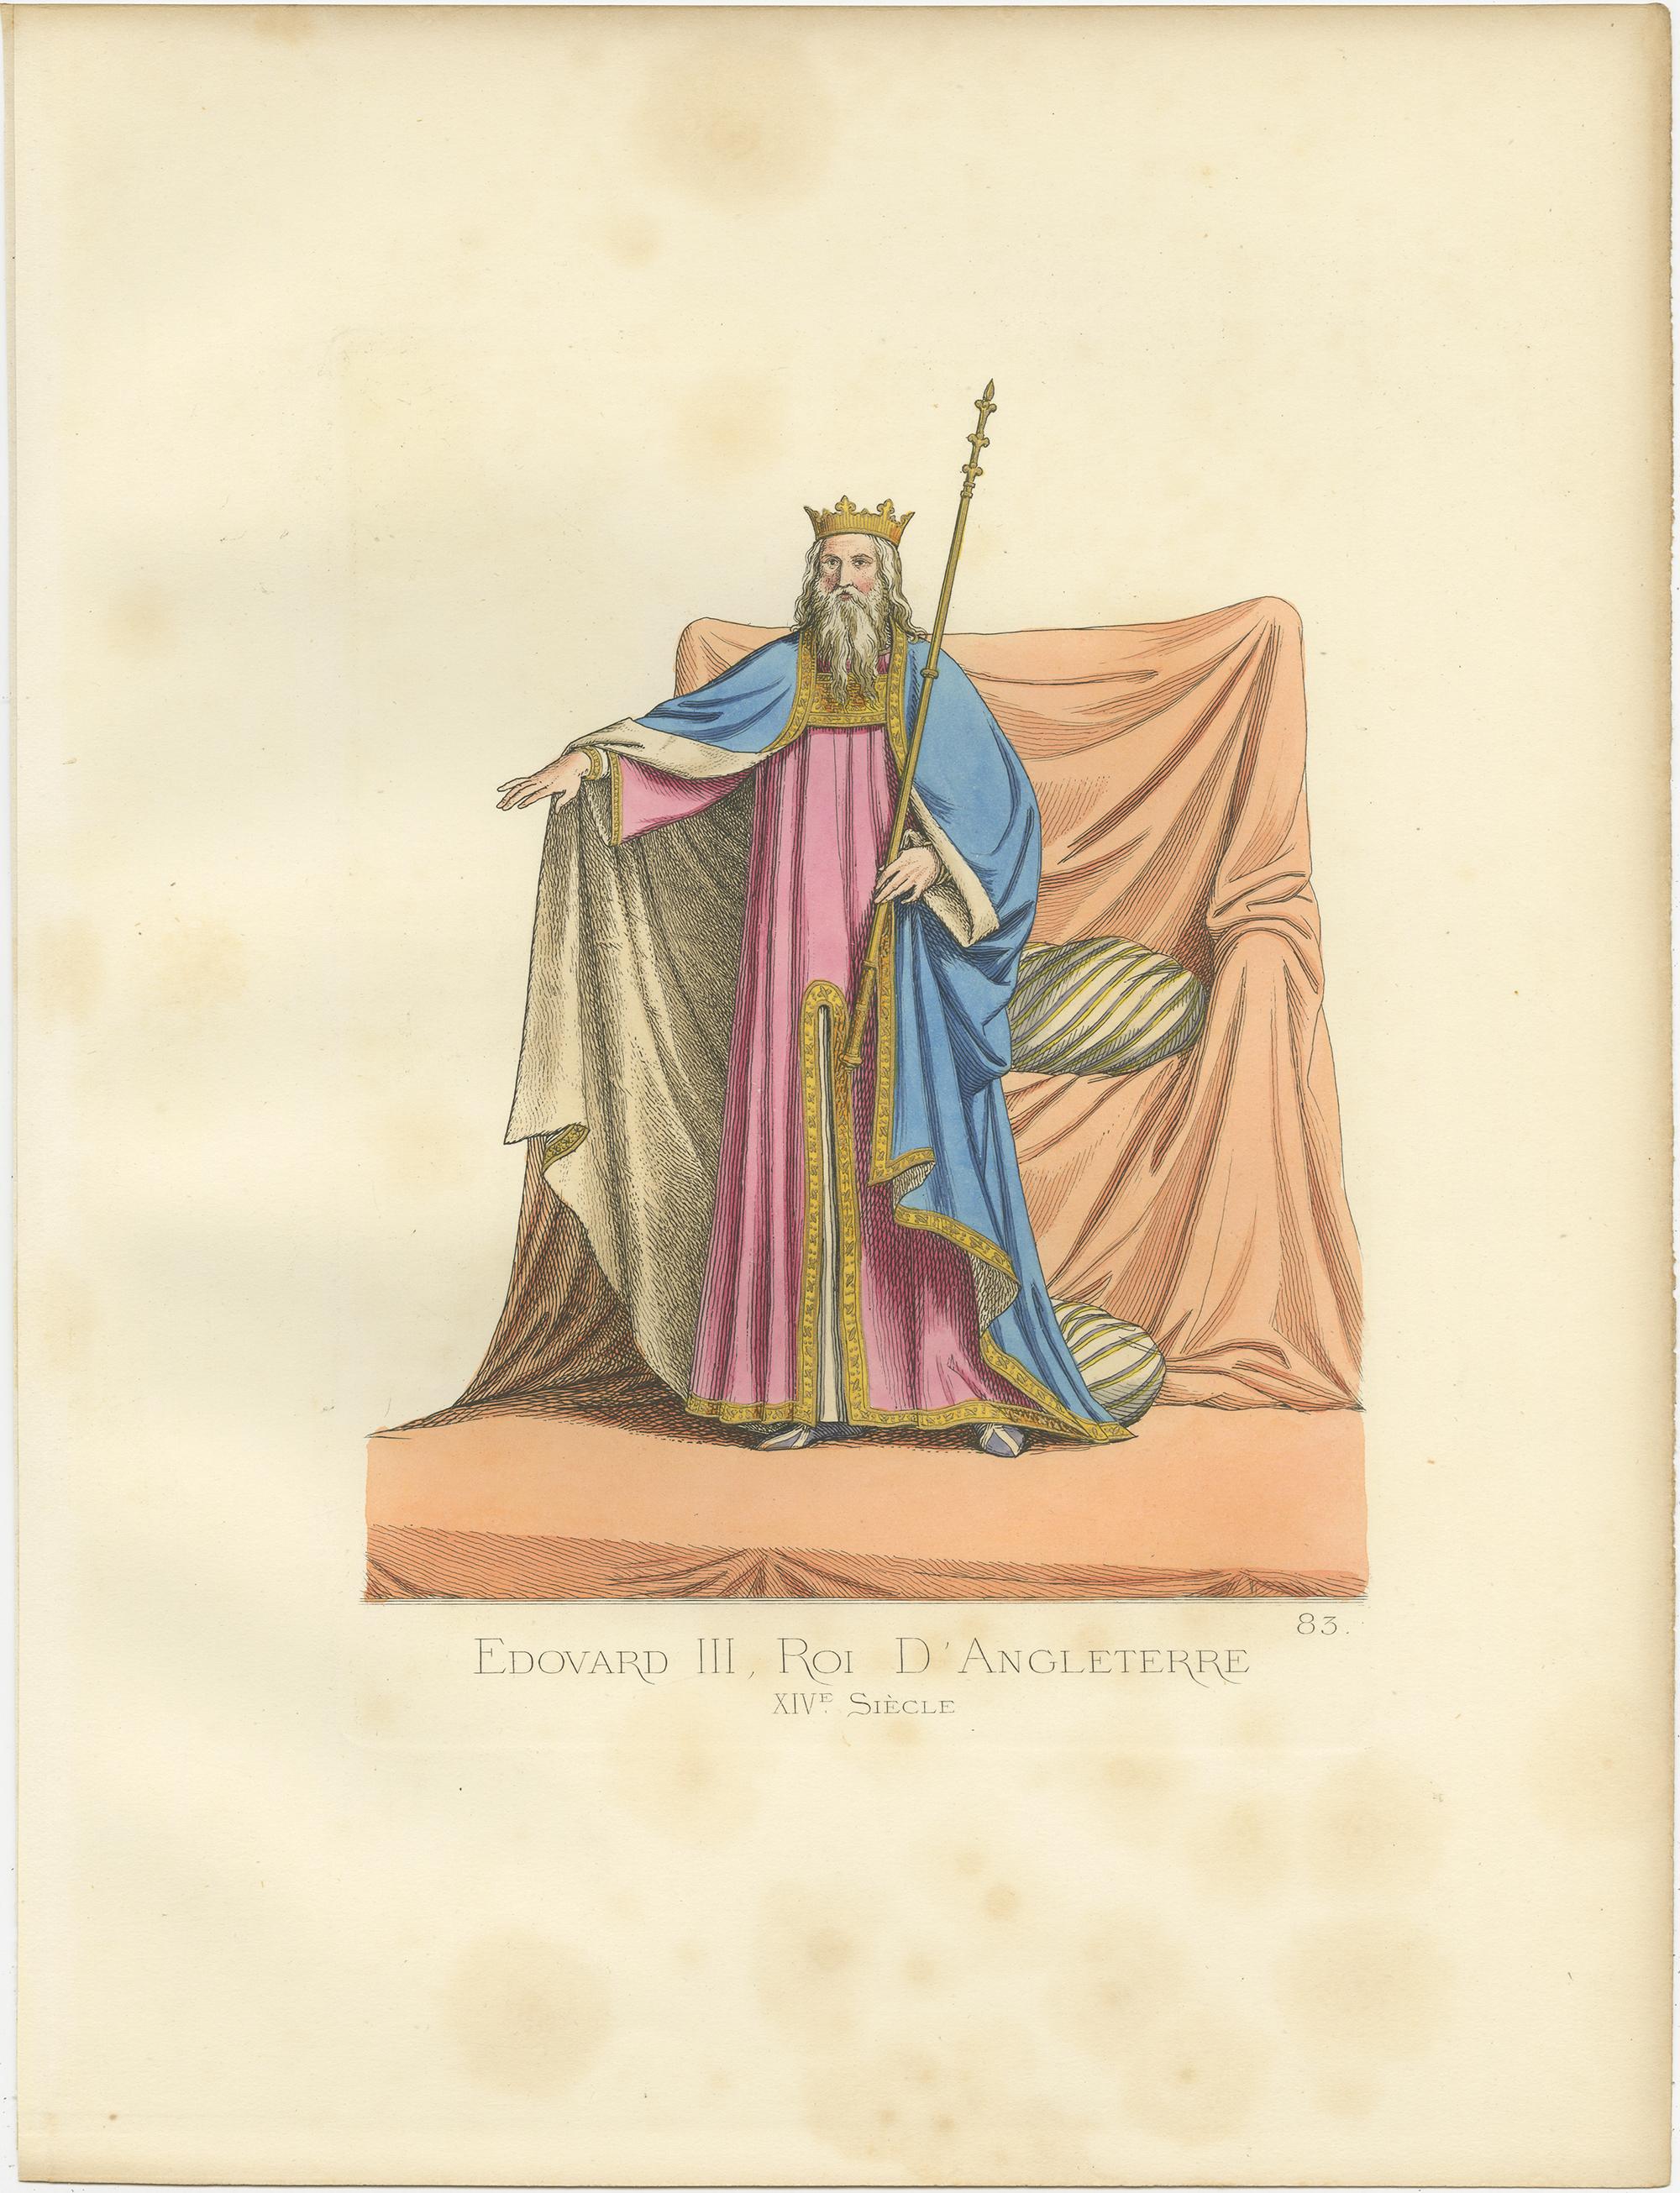 19th Century Antique Print of Edward III, King of England, by Bonnard, 1860